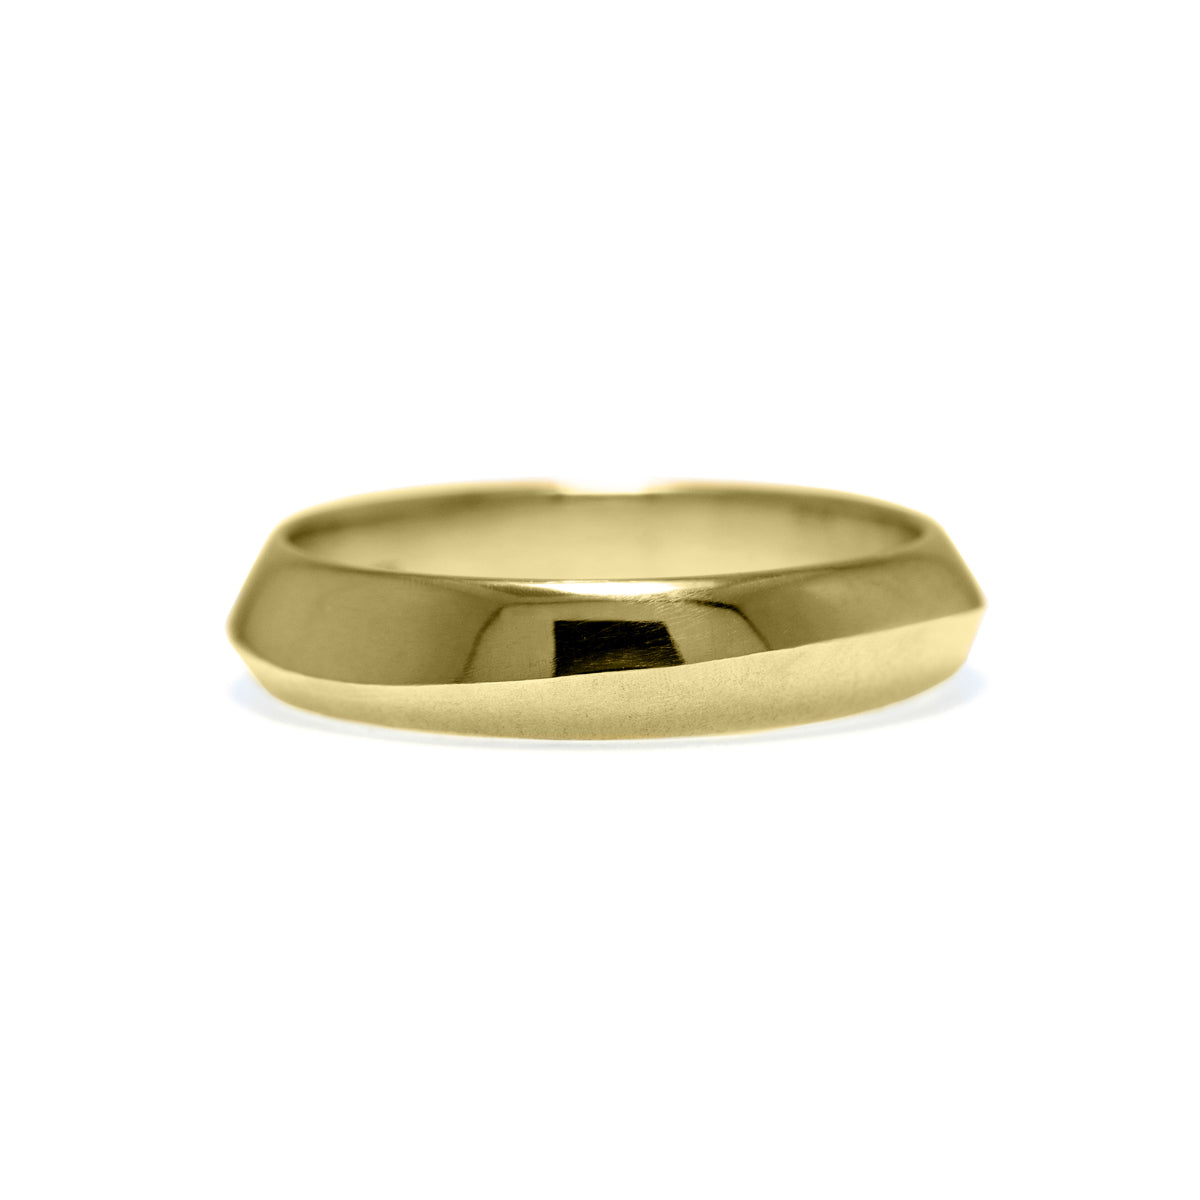 Peak wedding ring carved wave recycled yellow gold